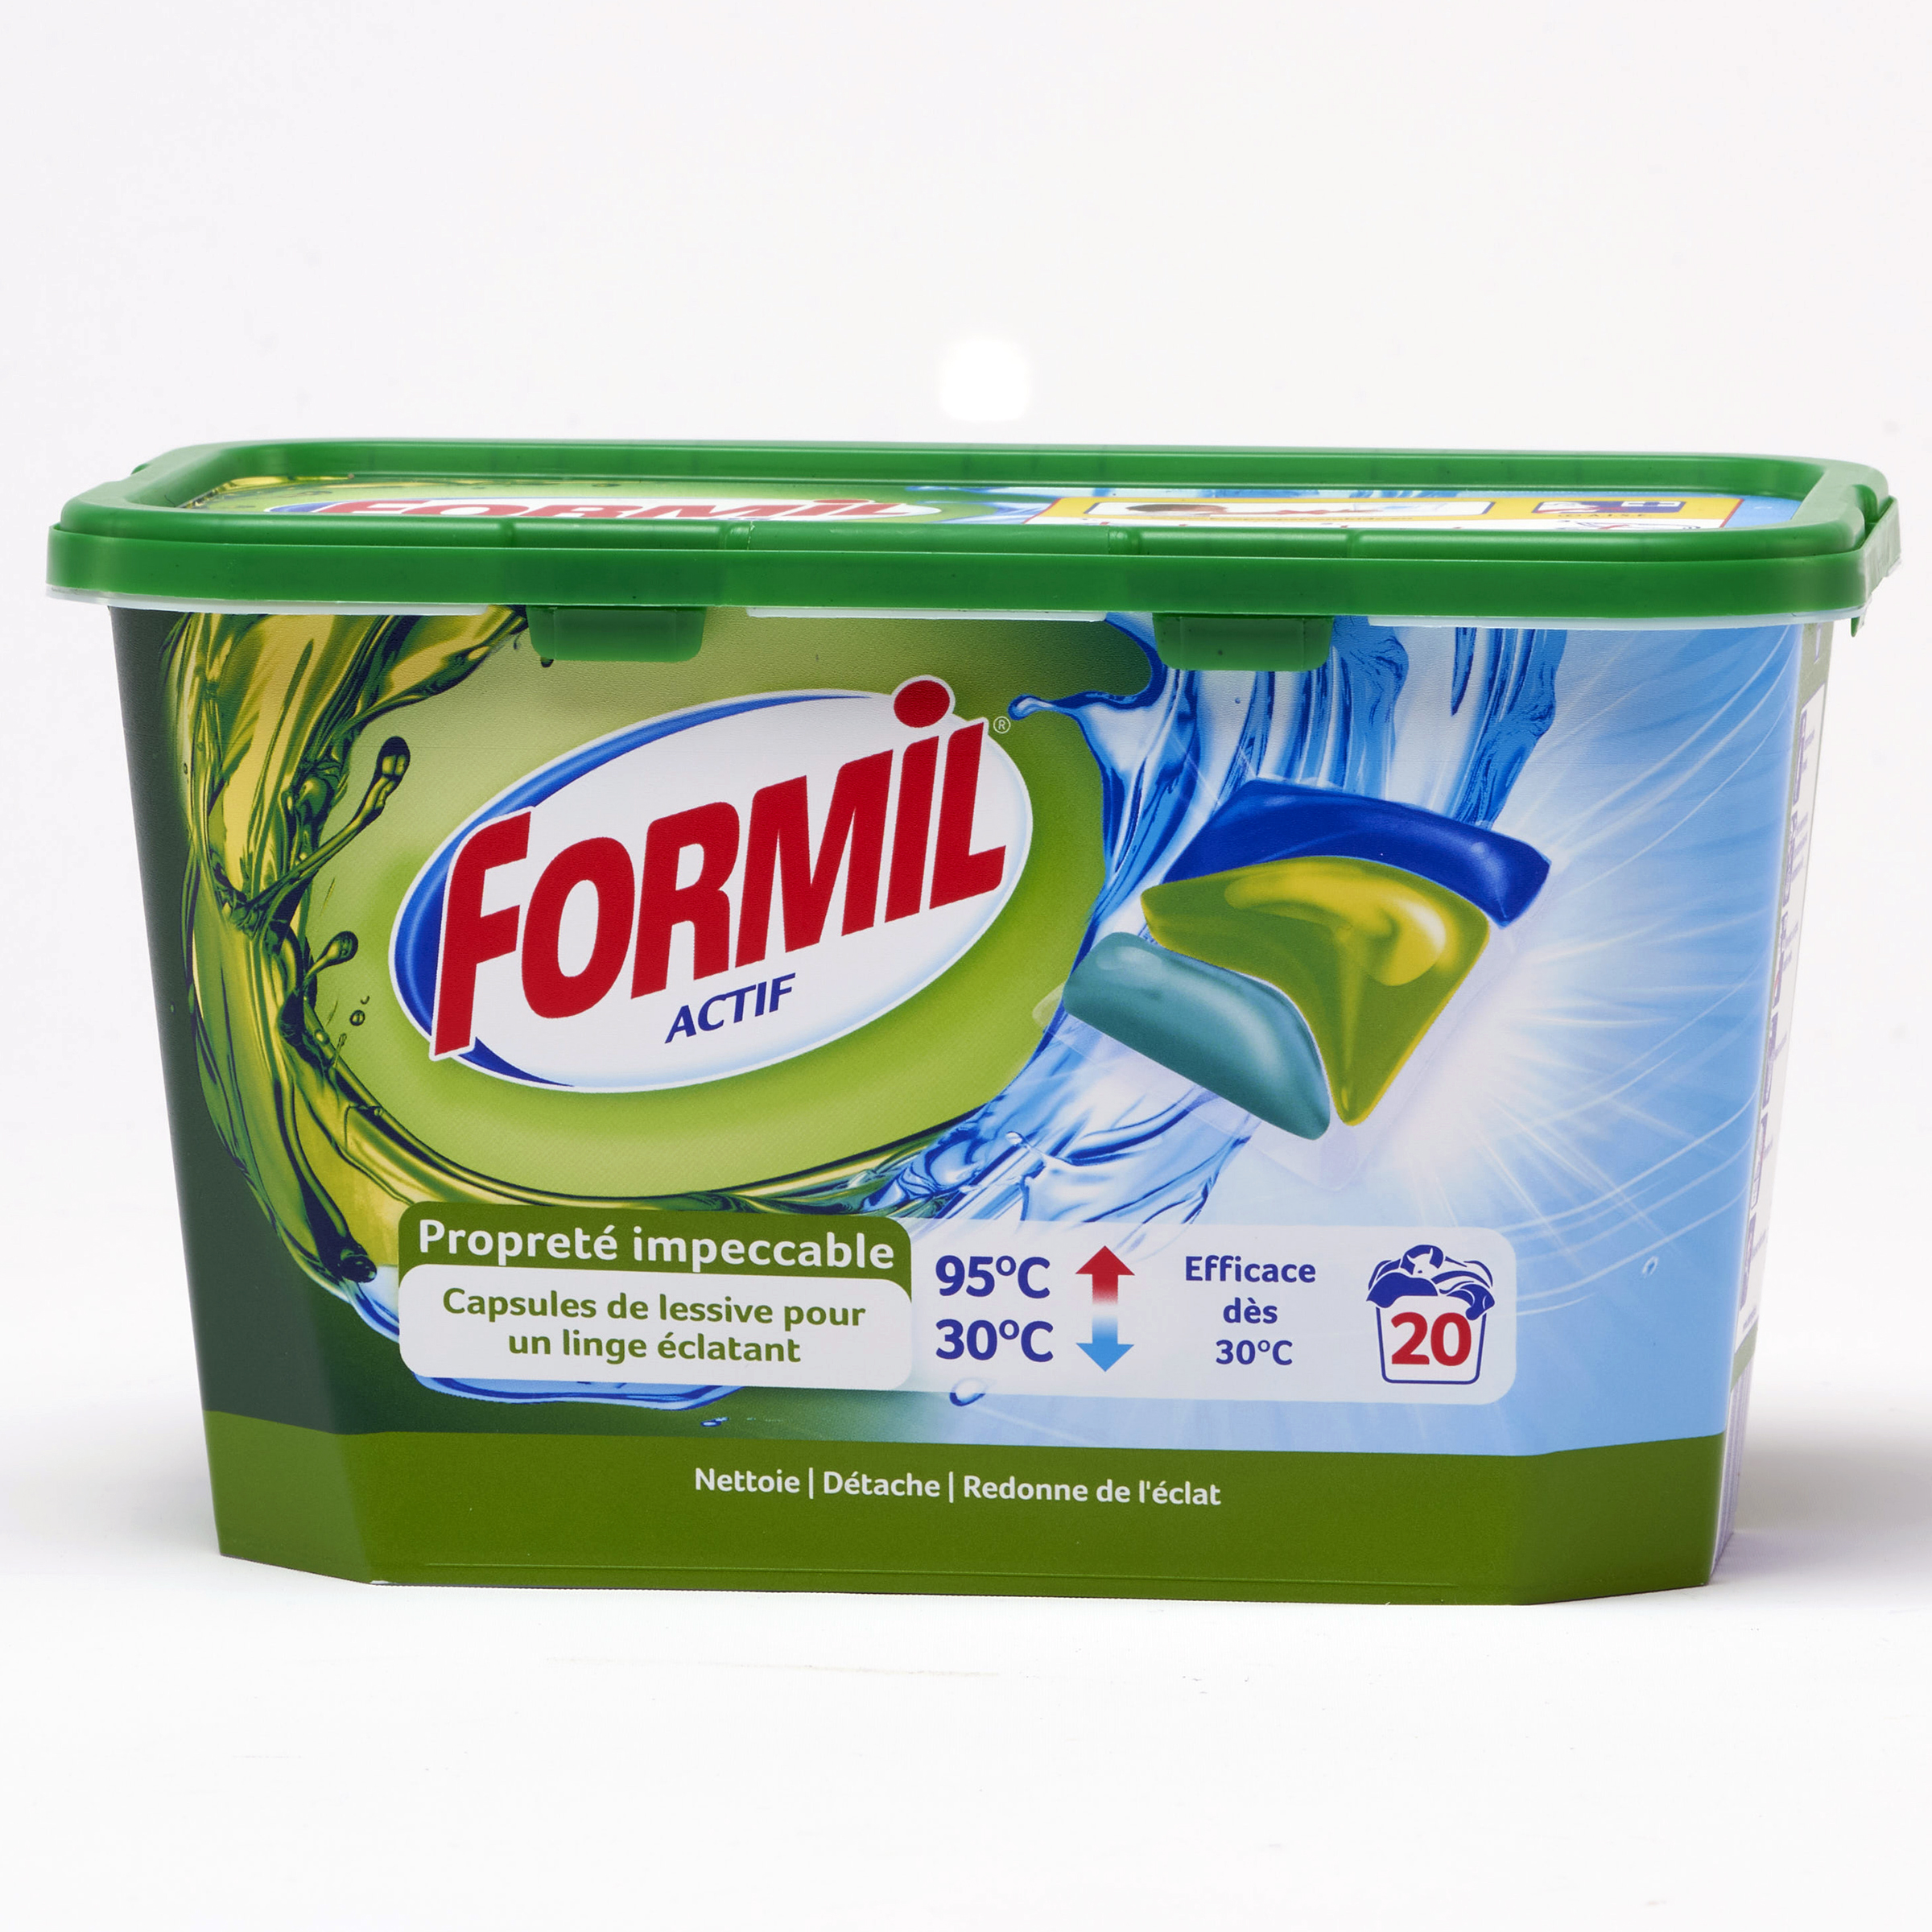 Formil (Lidl) Duo power actif - 